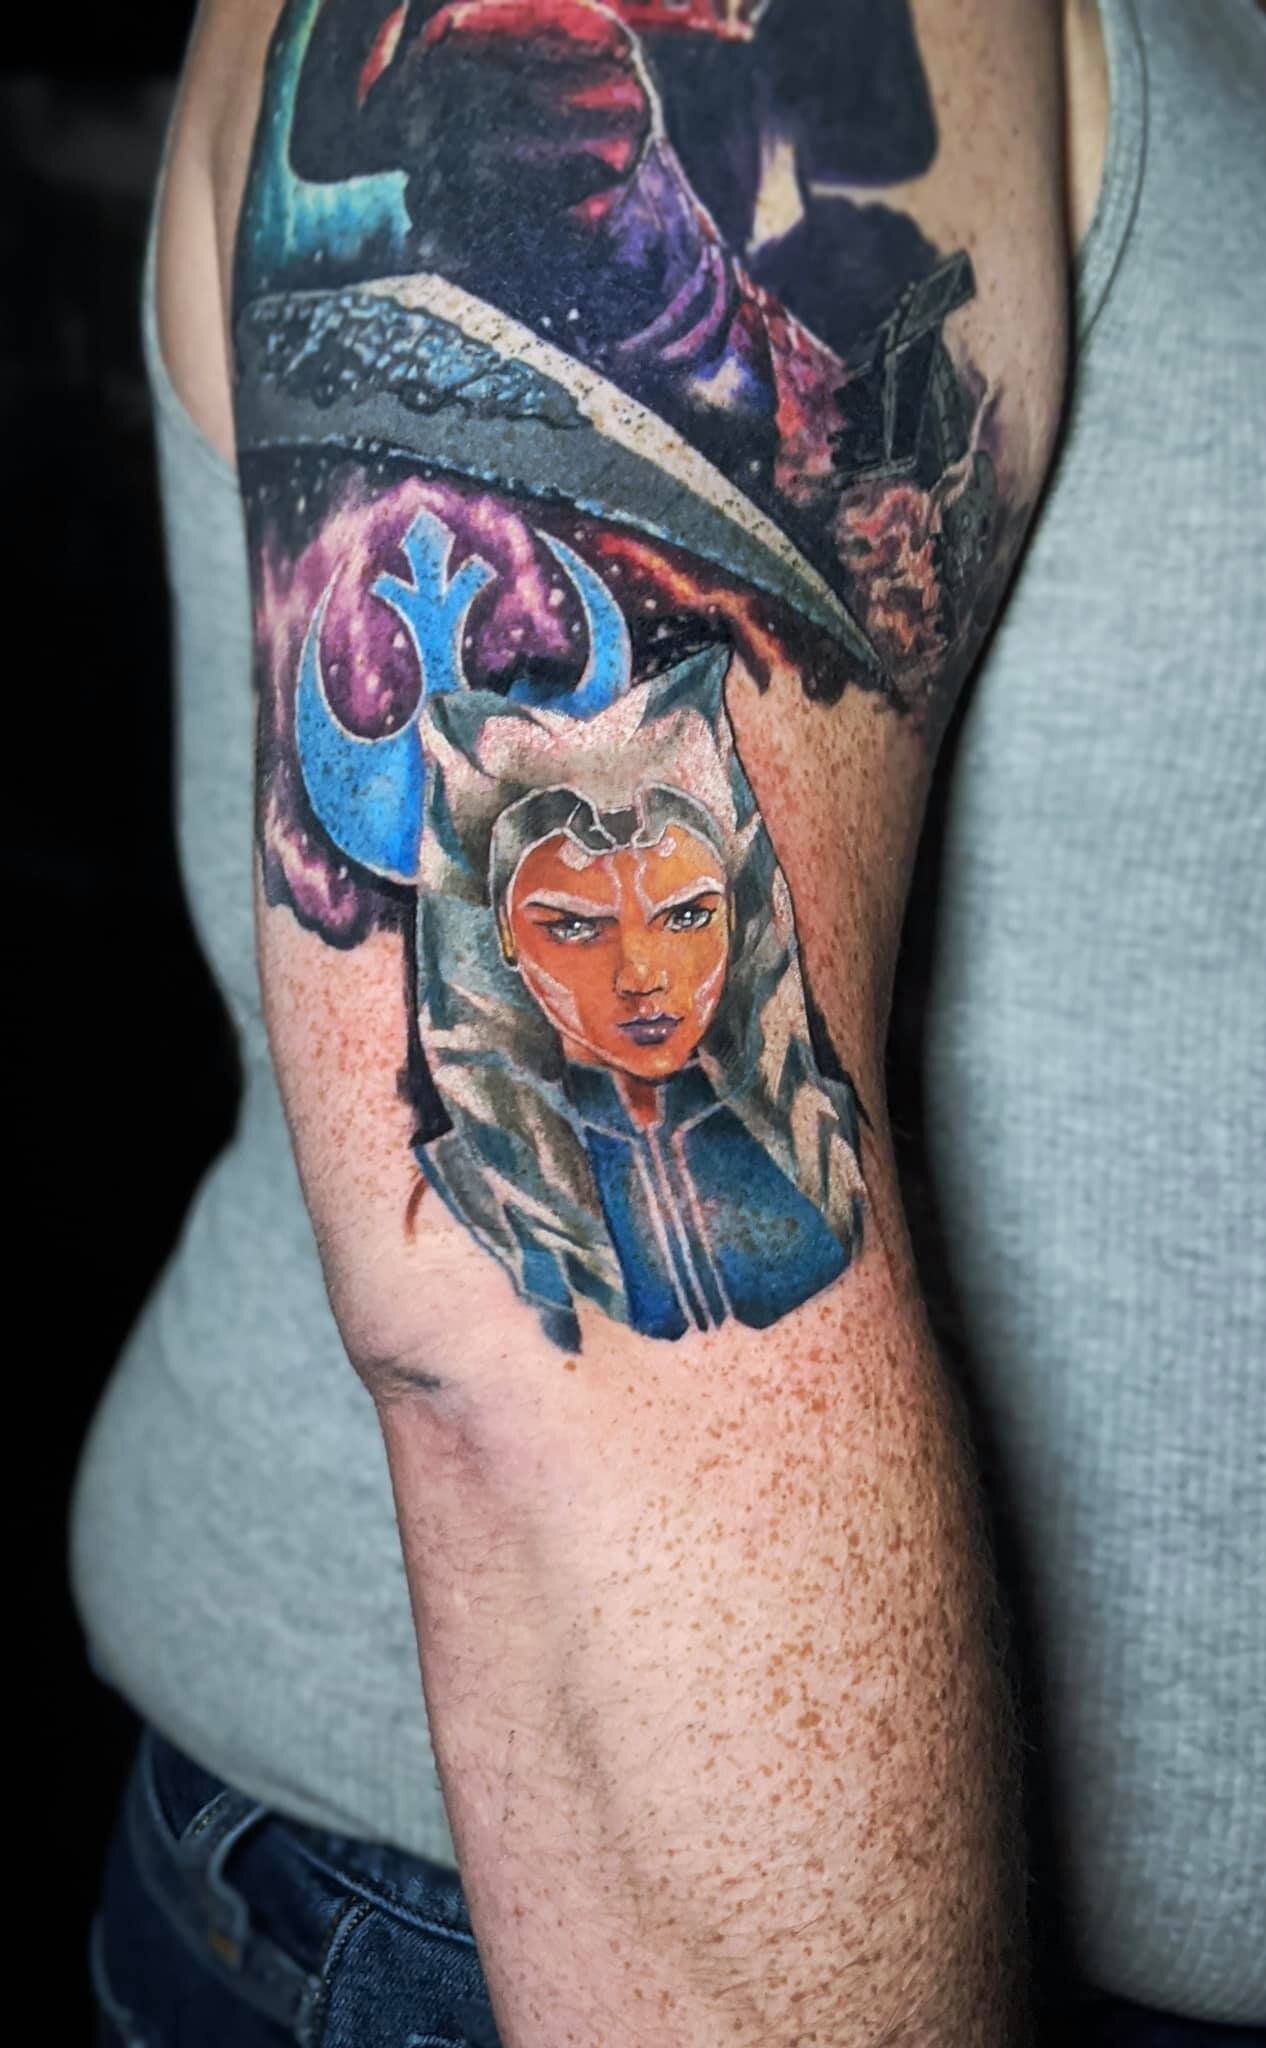 92 Ideas For Star Wars Tattoos That Every Padawan Deserves To See